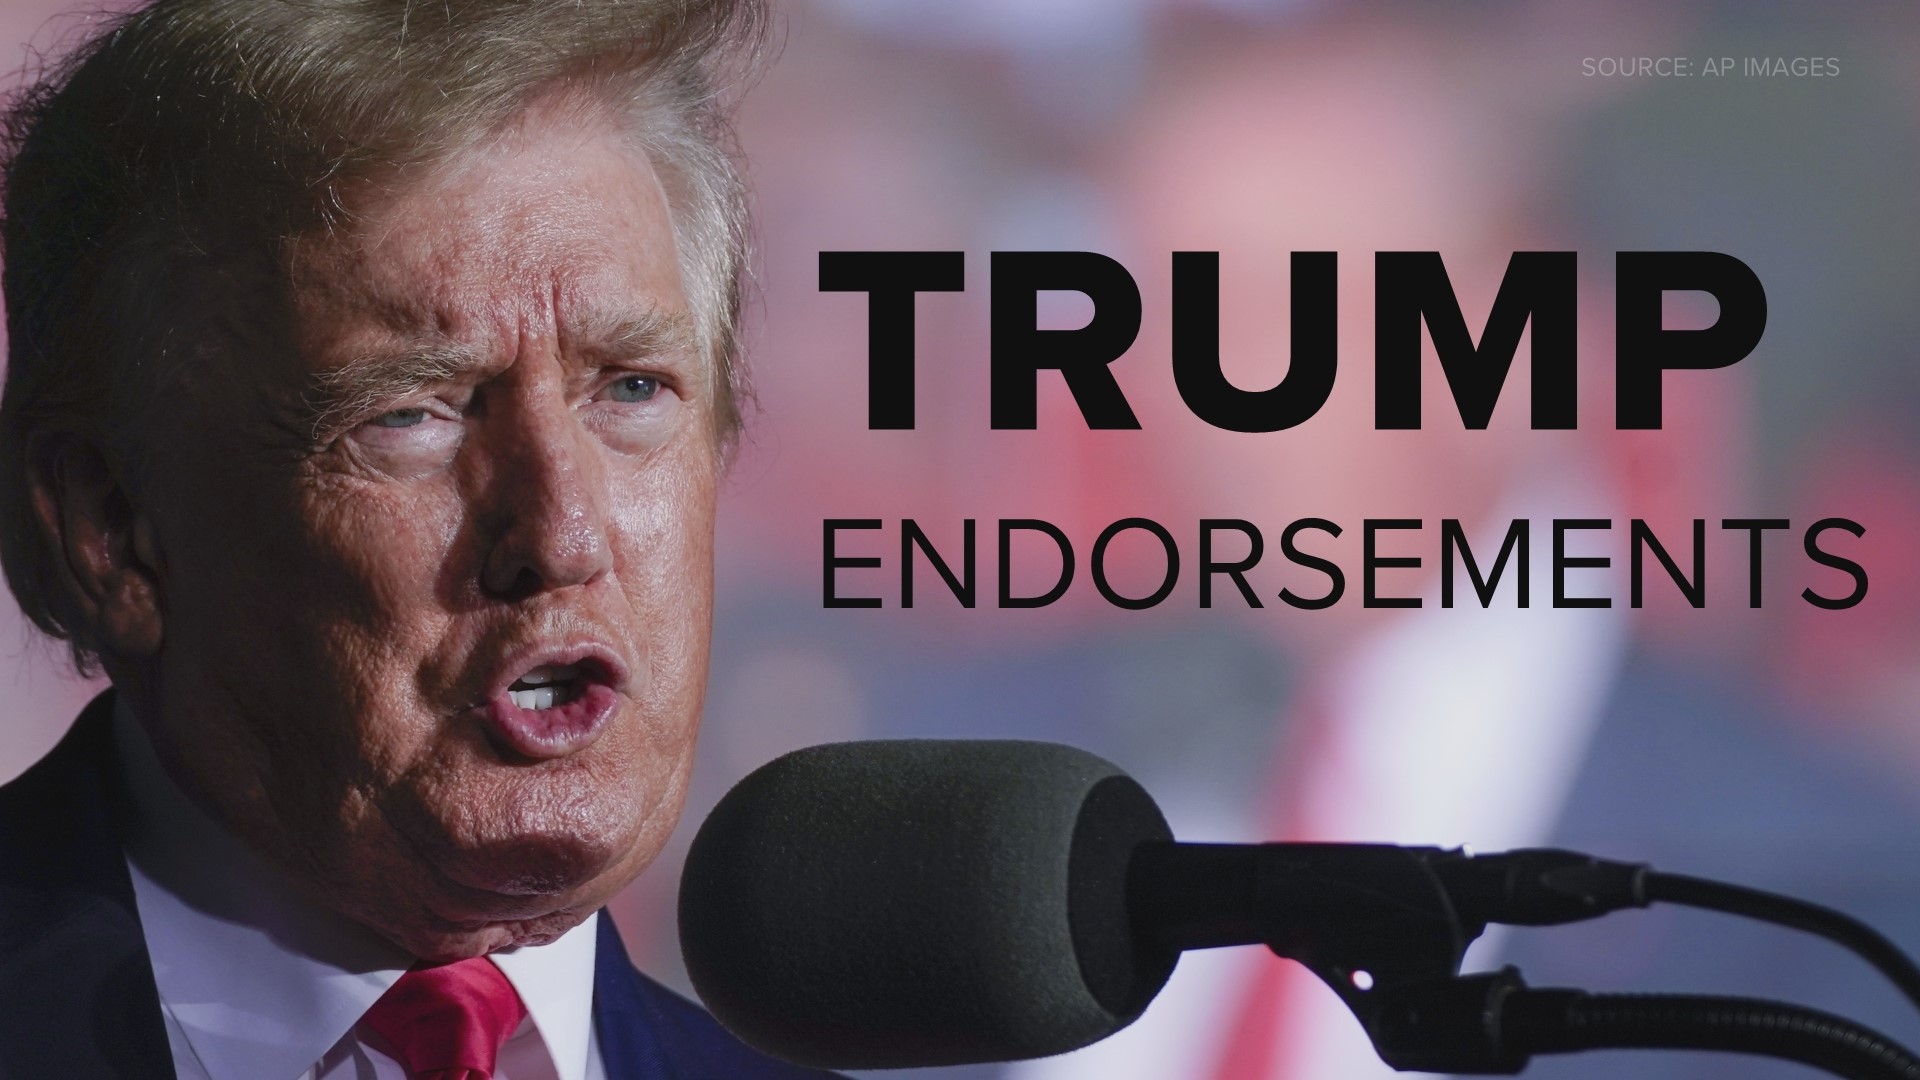 Former President Donald Trump has endorsed 238 candidates in regular and special elections in 2022.